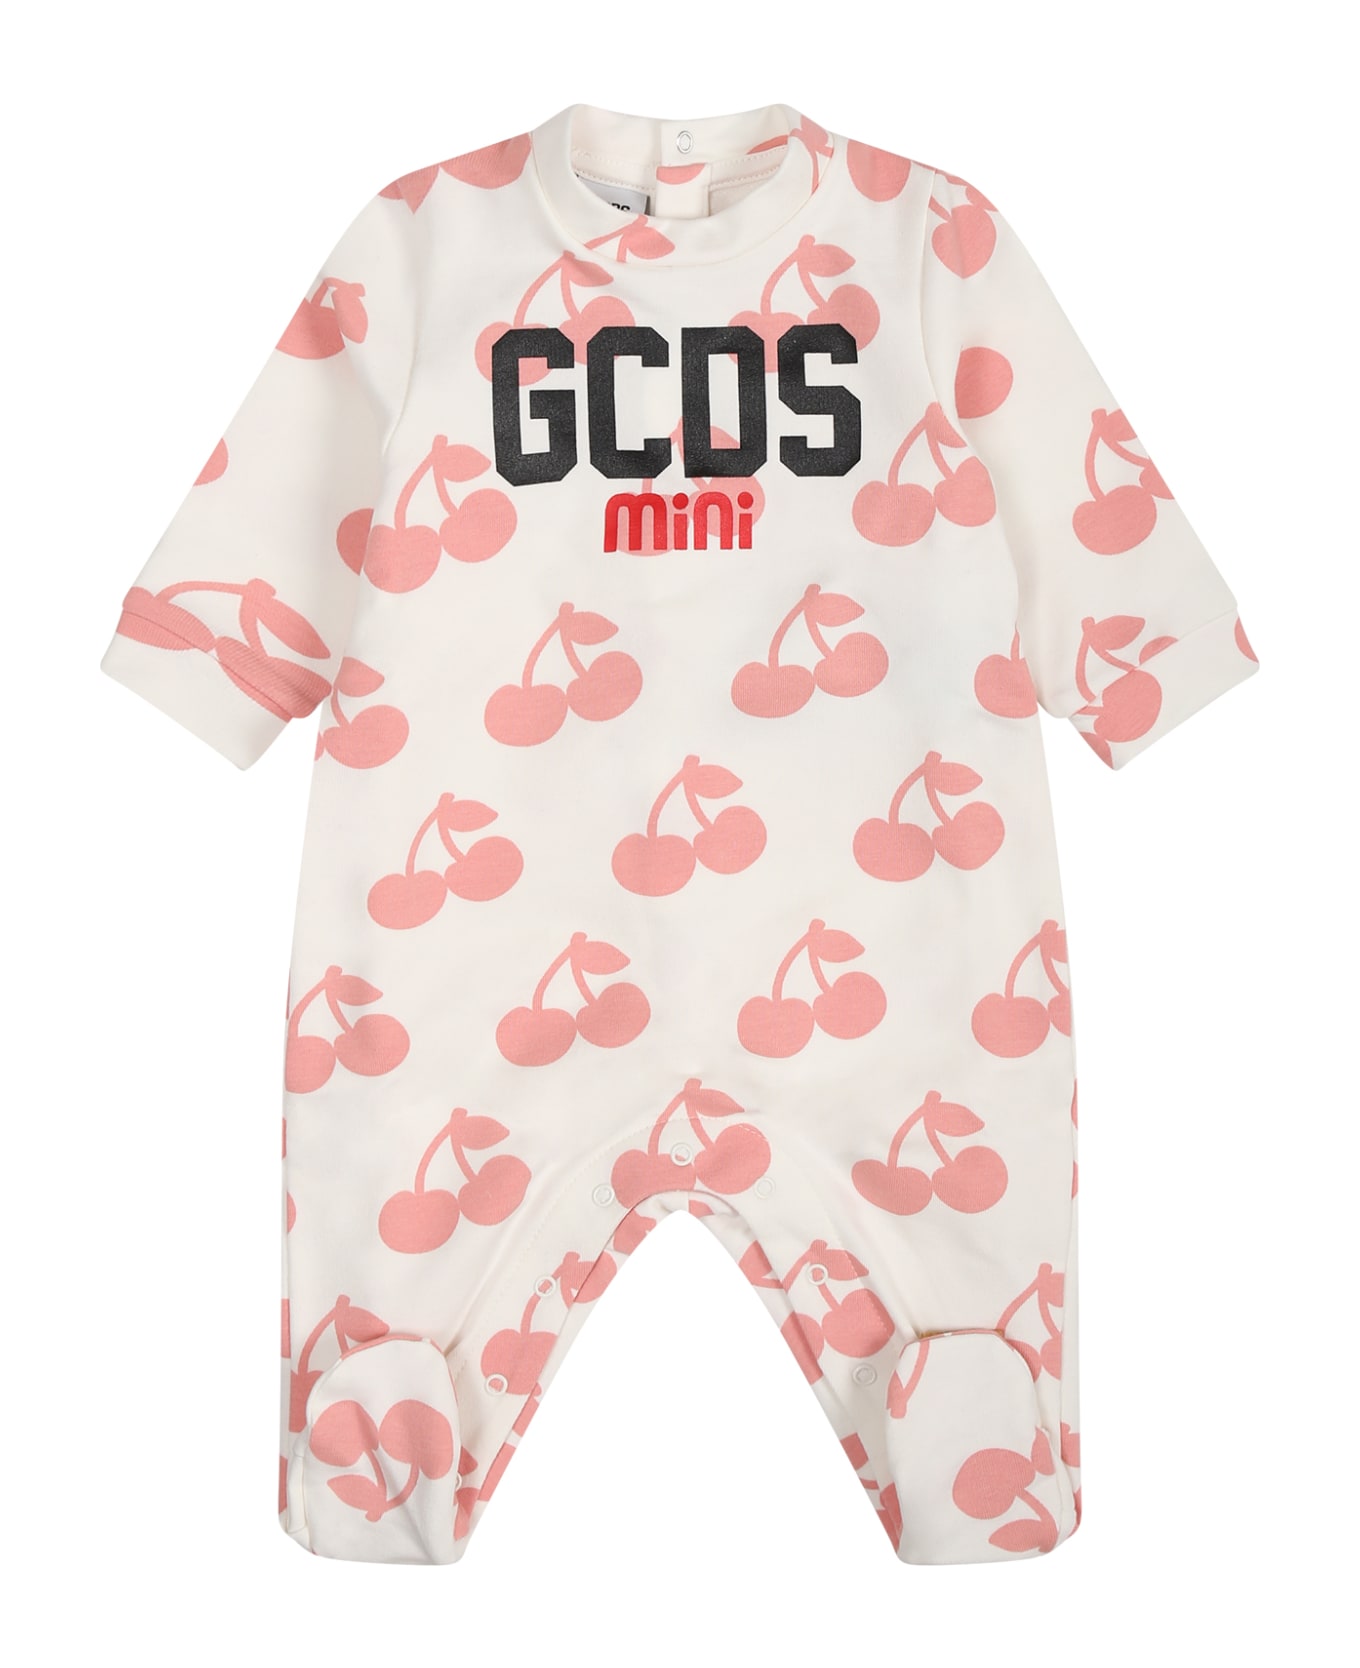 GCDS Mini Pink Jumpsuit For Baby Girl With Cherries - Pink